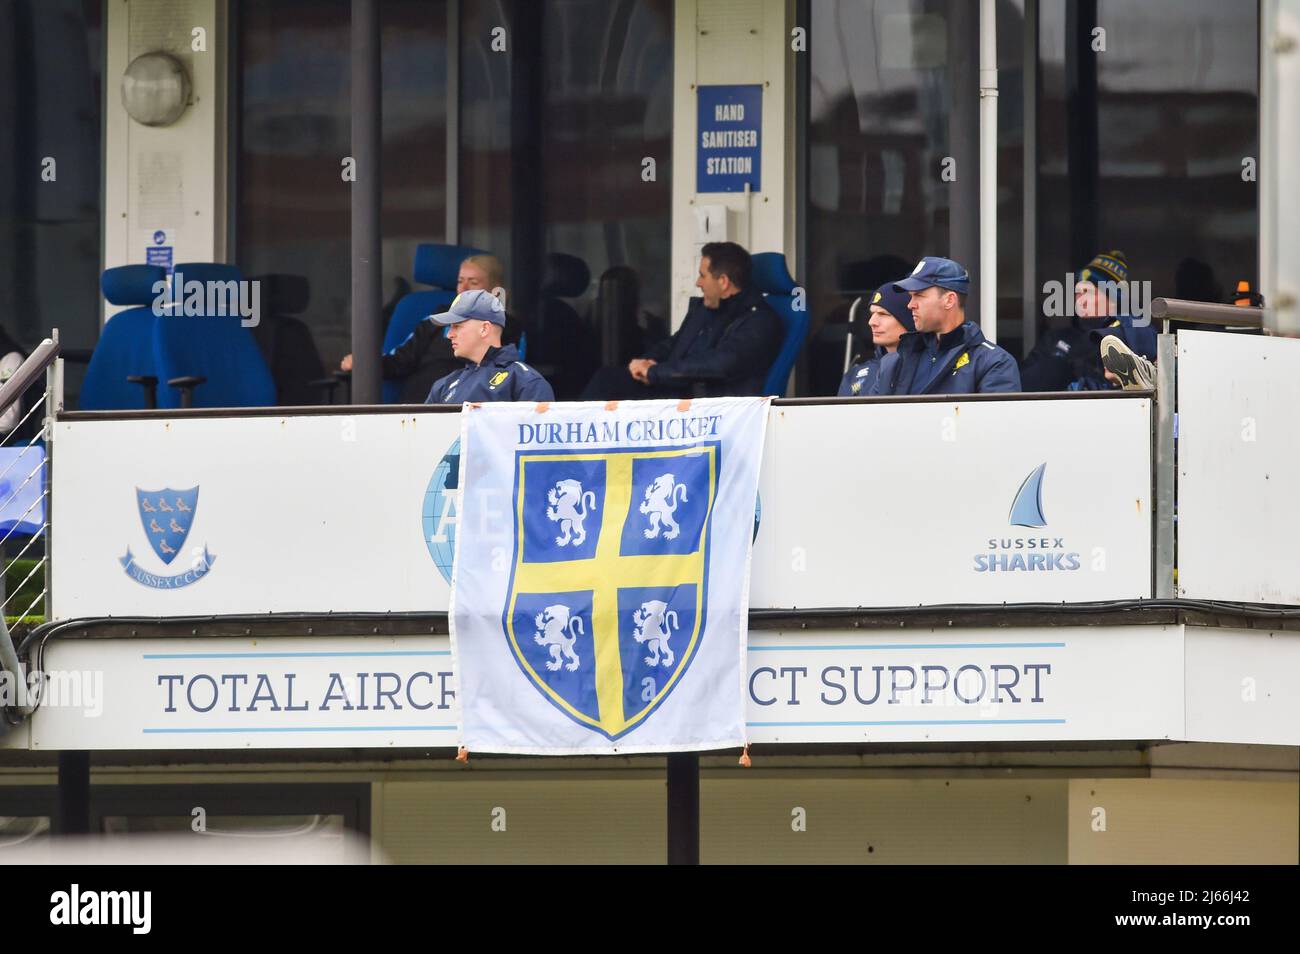 Hove UK 28th April 2022 - Members of the Durham team watch from the balcony y as they take on Sussex on the first day of their LV= Insurance County Championship match at The 1st Central County Ground  in Hove . : Credit Simon Dack / Alamy Live News Stock Photo